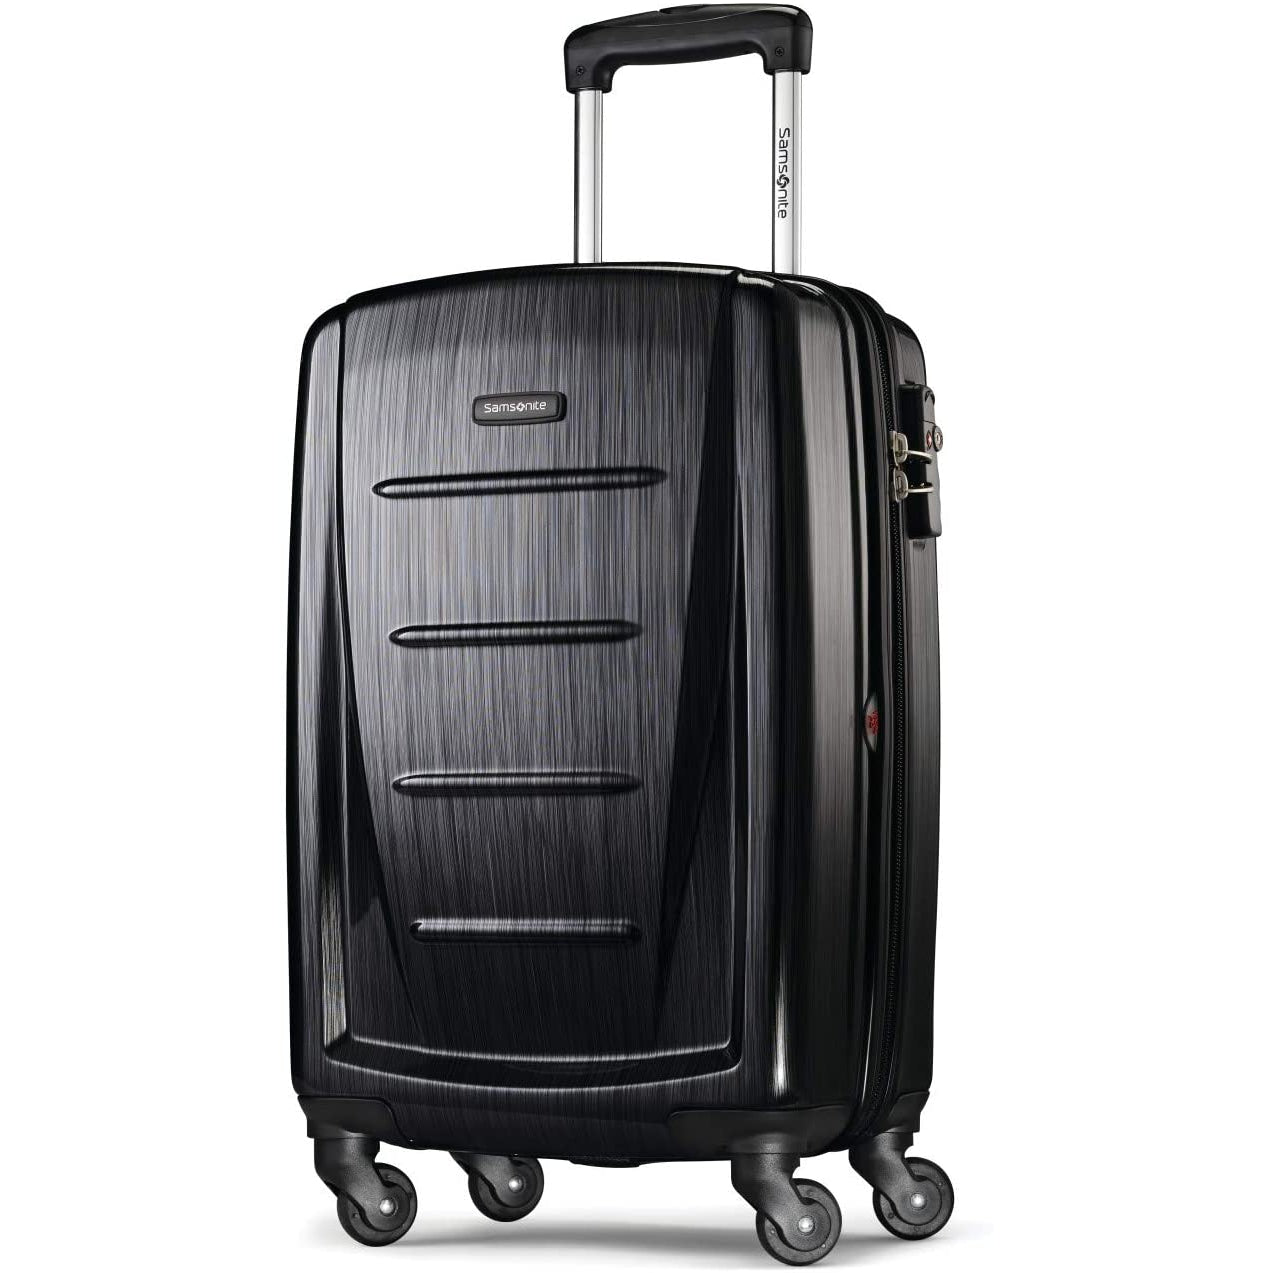 Samsonite Winfield 2 Fashion 20" Hardside Carry-On, Anthracite